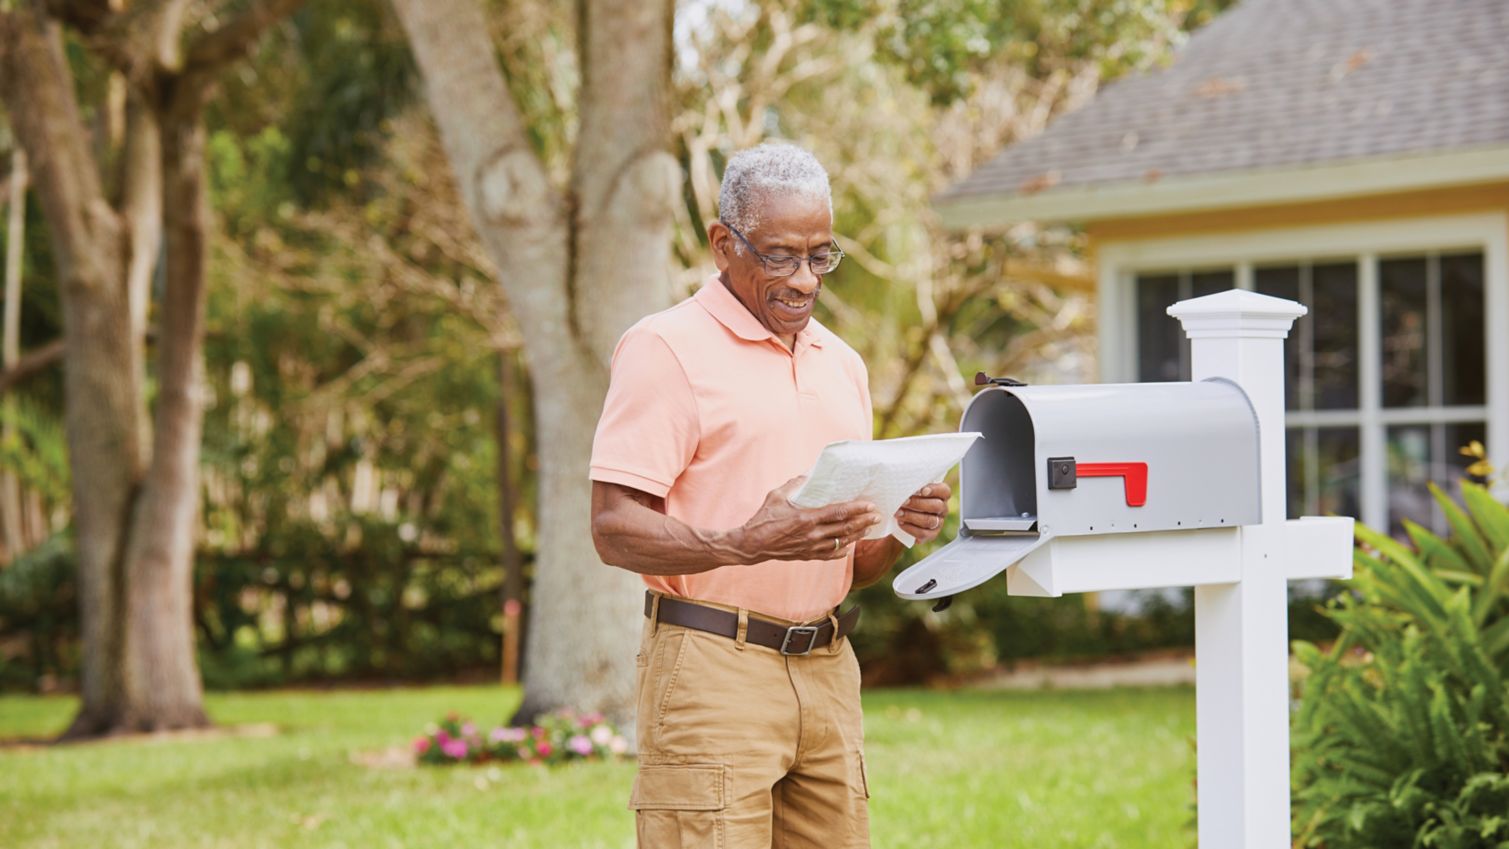 A man stands near his mailbox and smiles at a package he received.